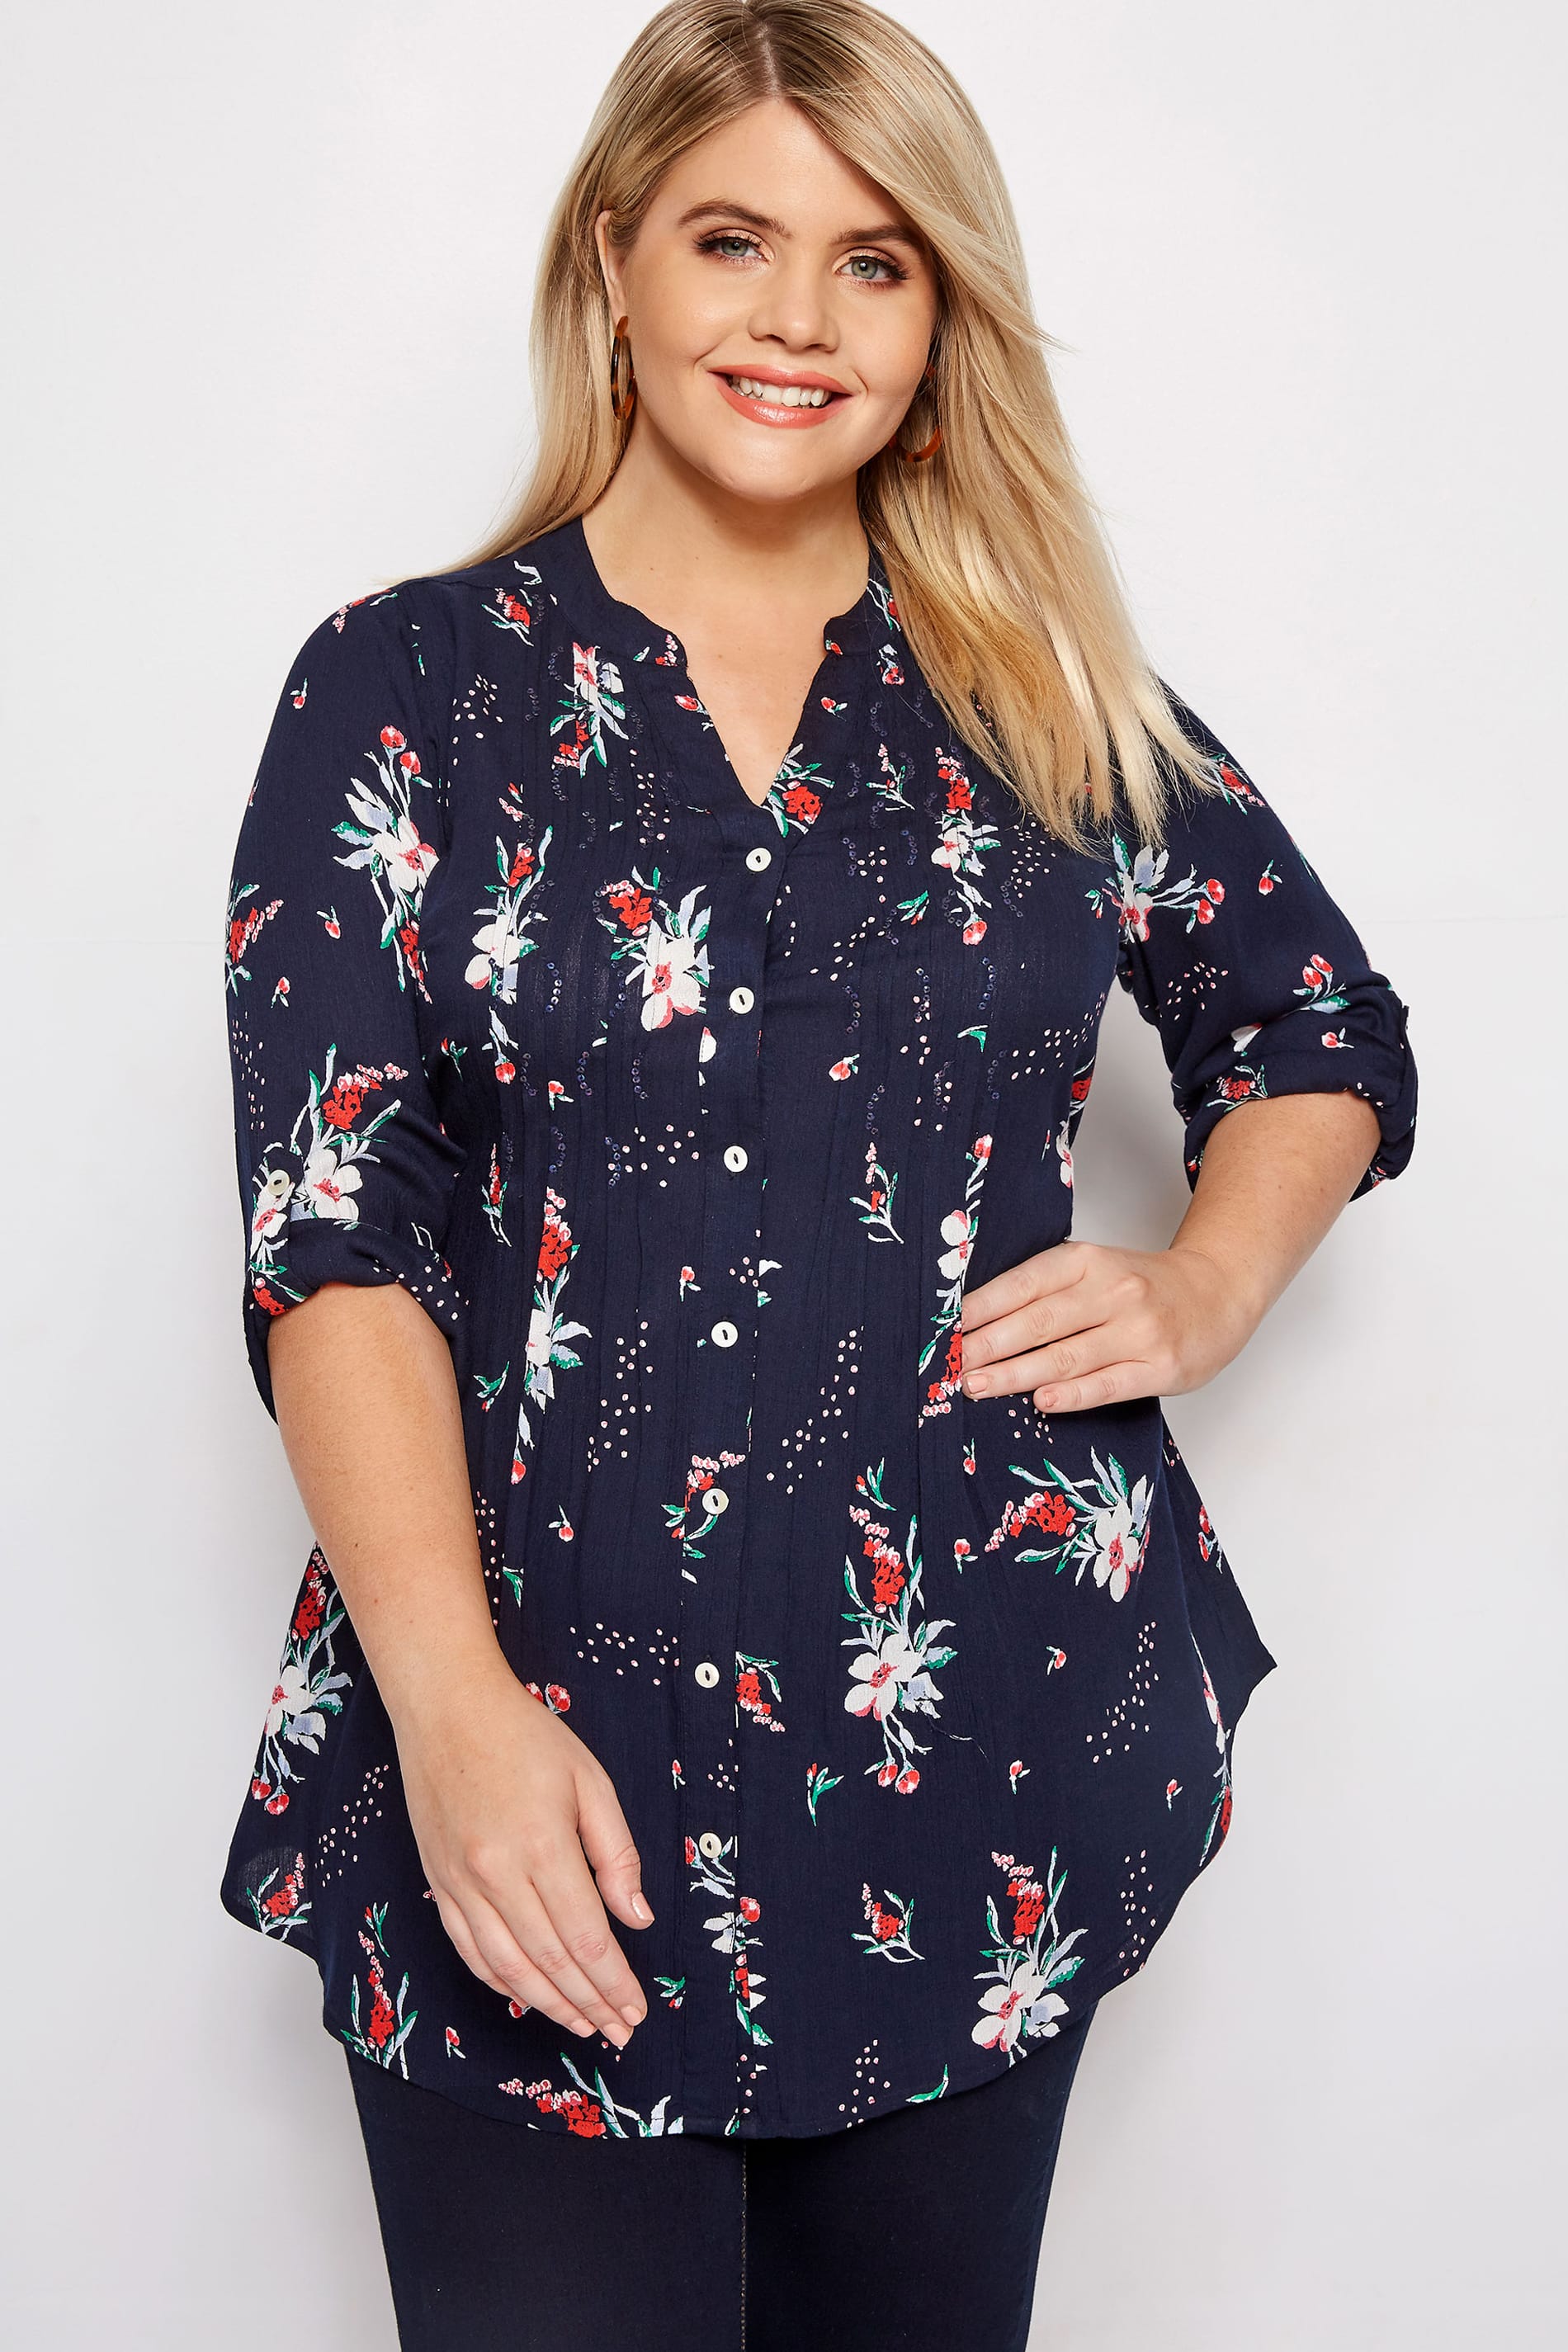 Jarlo online button up blouses for women plus sizes hong